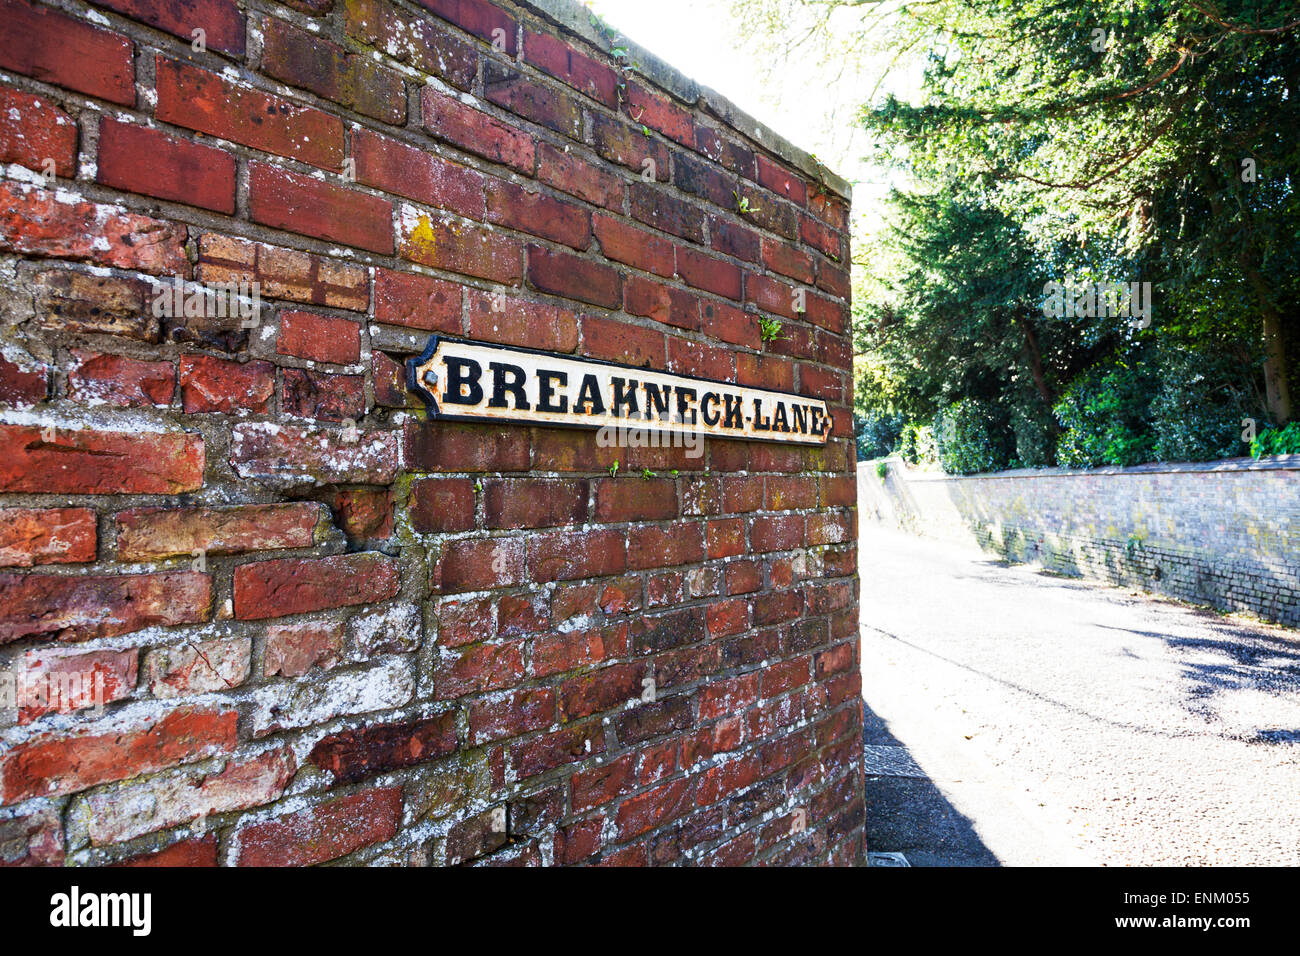 weird strange unusual funny amusing road street name sign signs 'Breakneck Lane' Louth Lincolnshire UK England Stock Photo